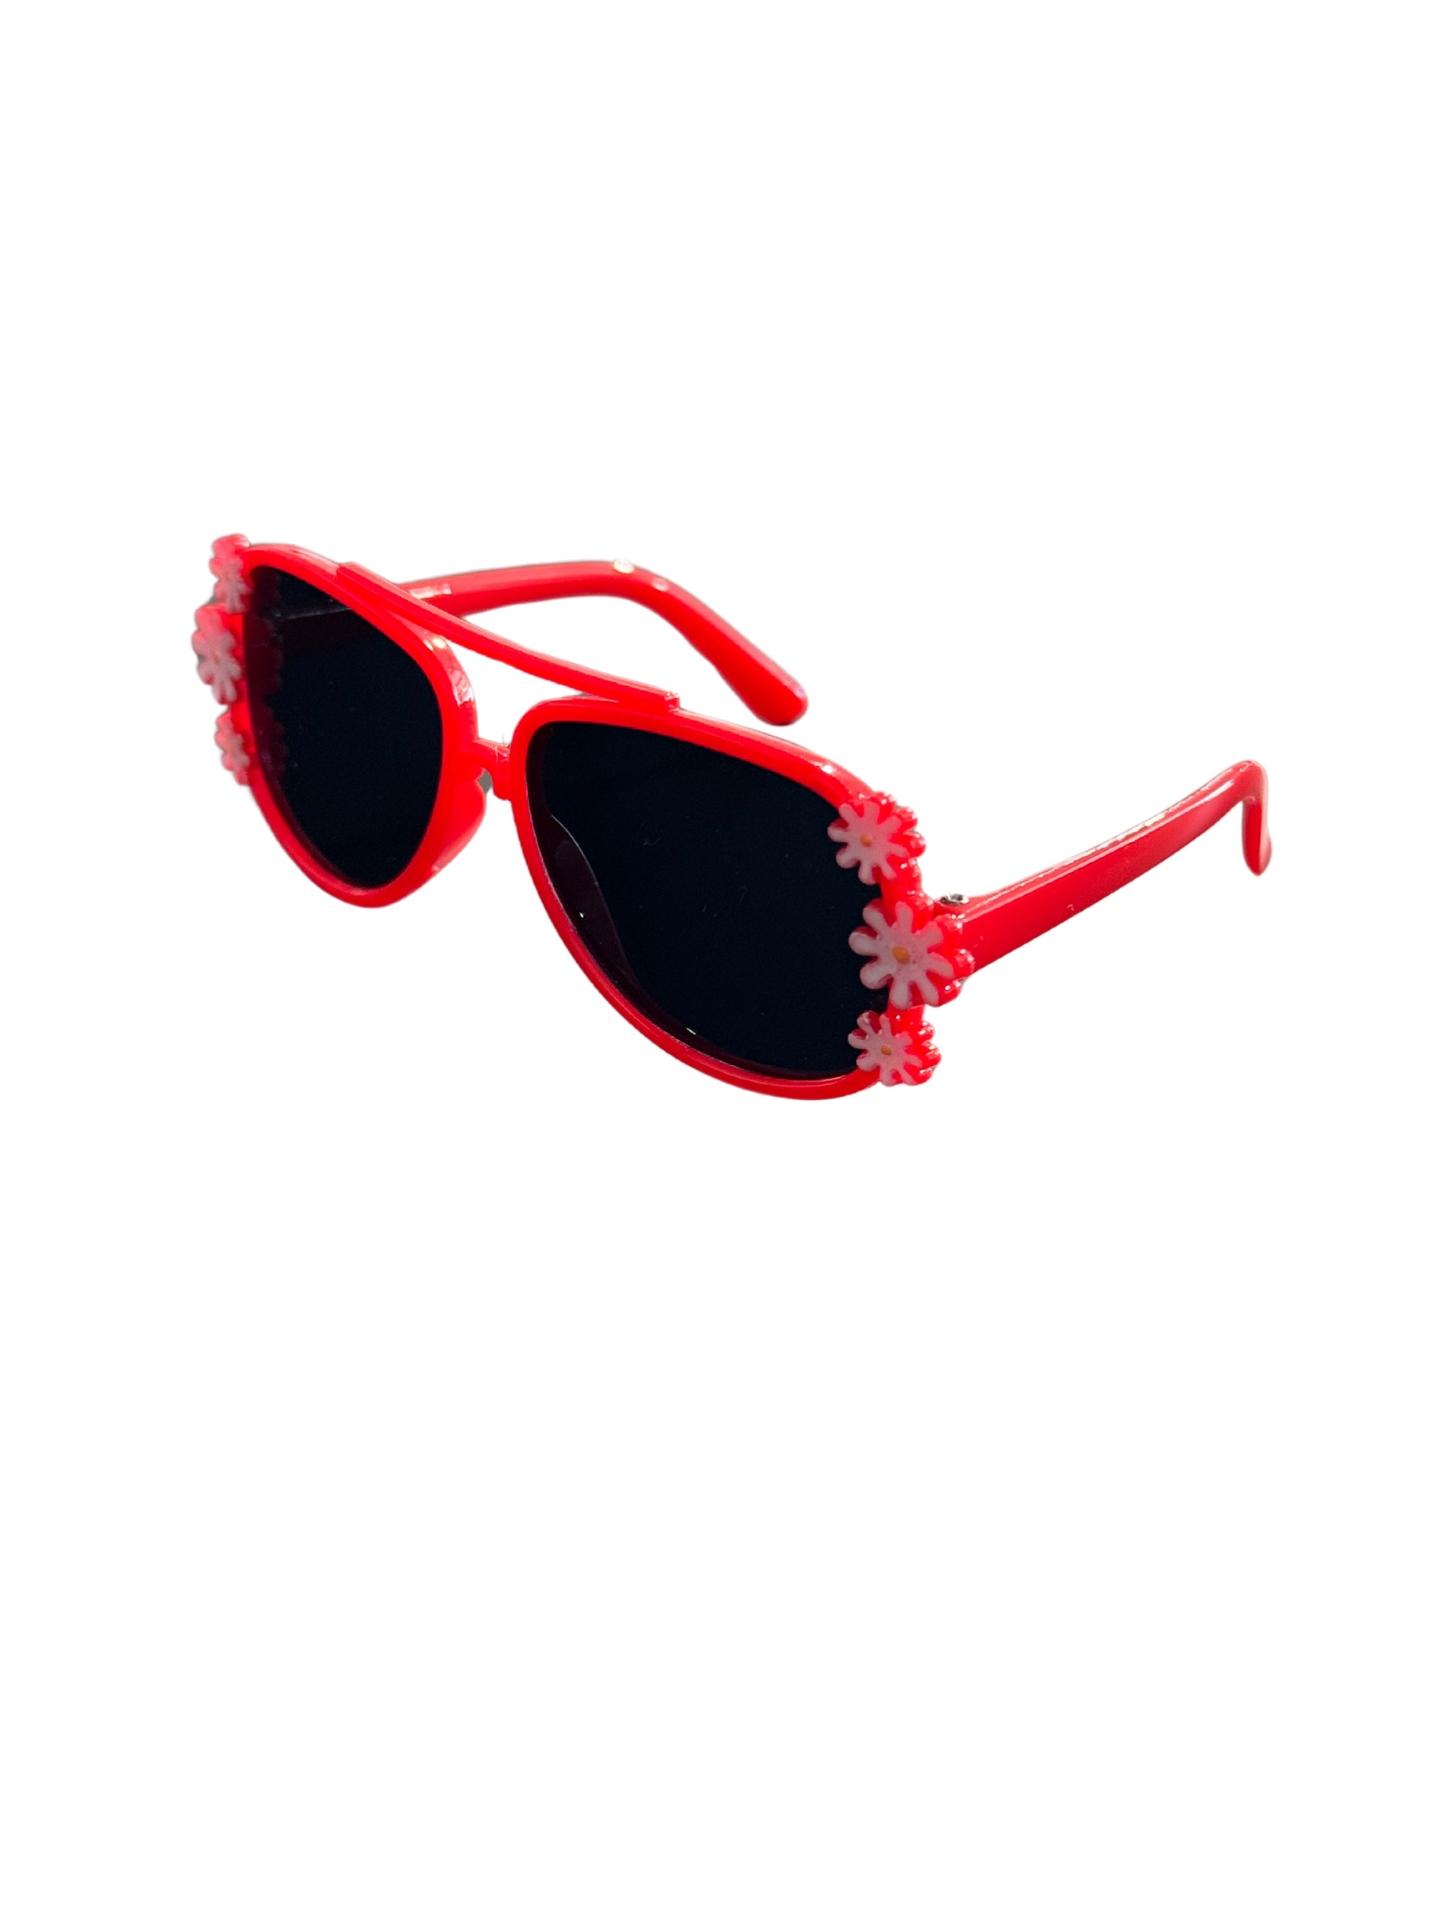 Red Sunglasses With White Daisy's